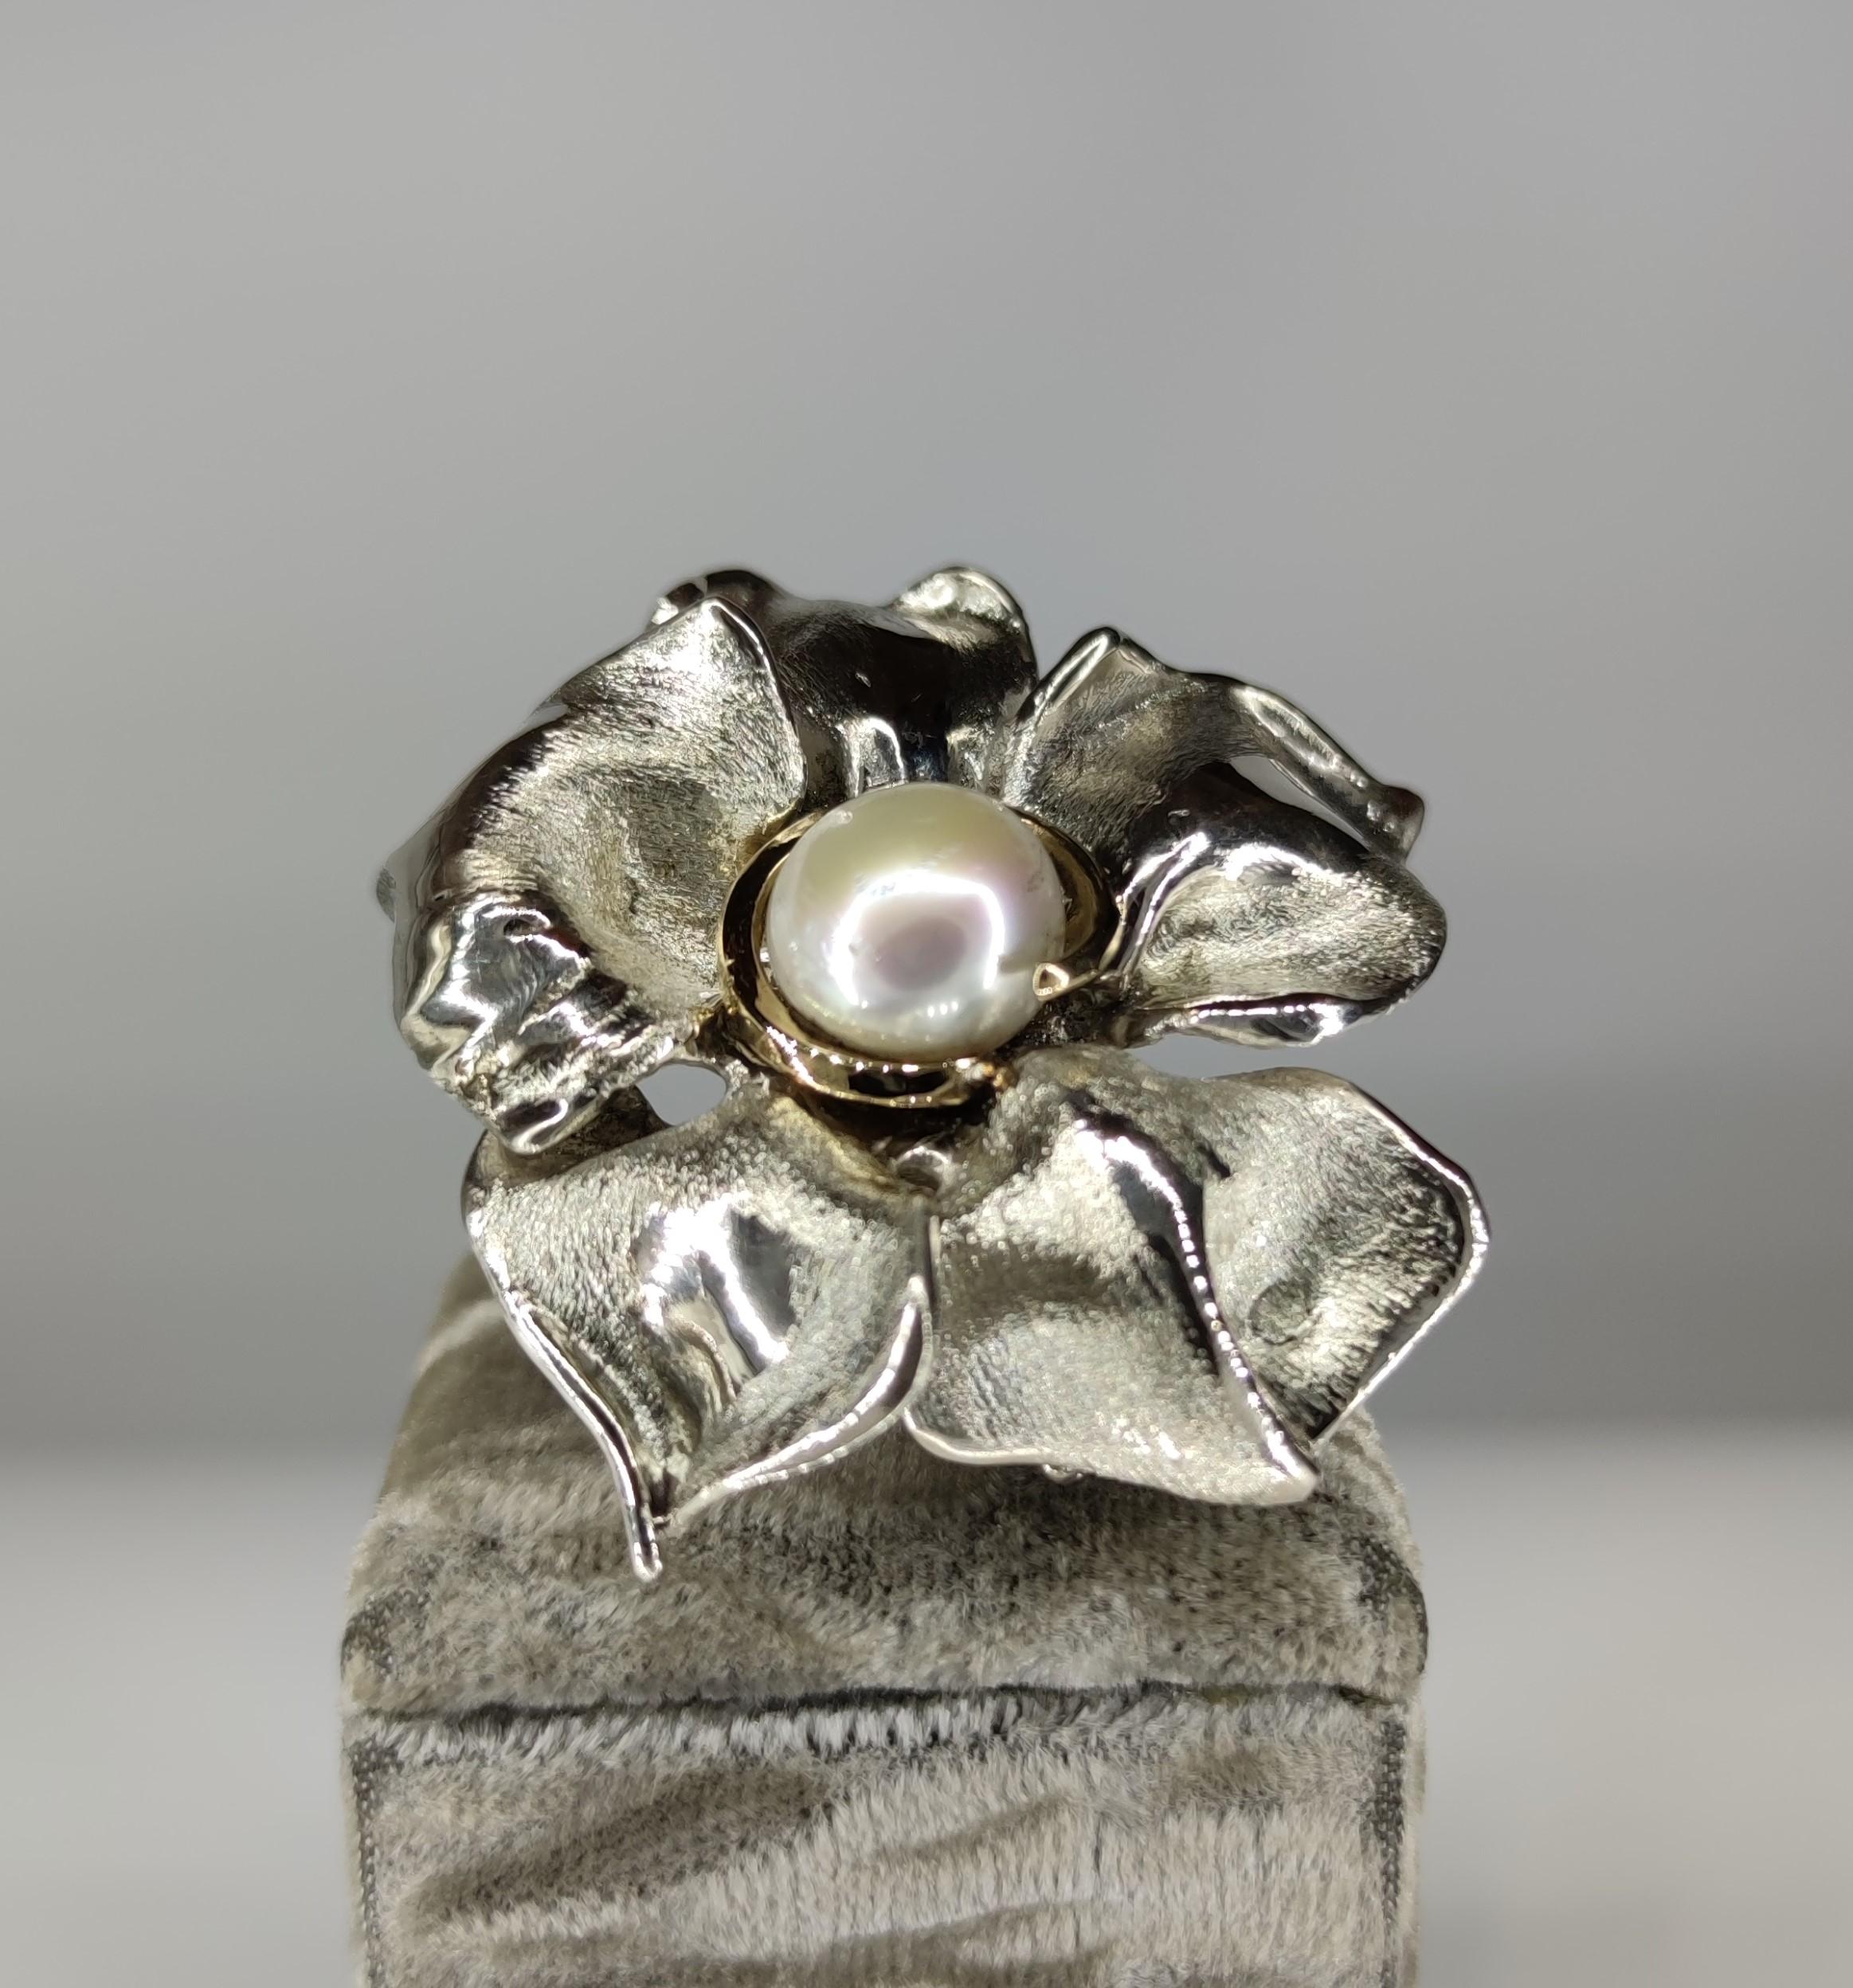 Ring from d'Avossa Rêves d'Argent Collection in silver 925 ‰.

A bright Flower with a central freshwater Pearl surrounded by details in 18kt yellow gold that add a fine touch.

Unique Piece

